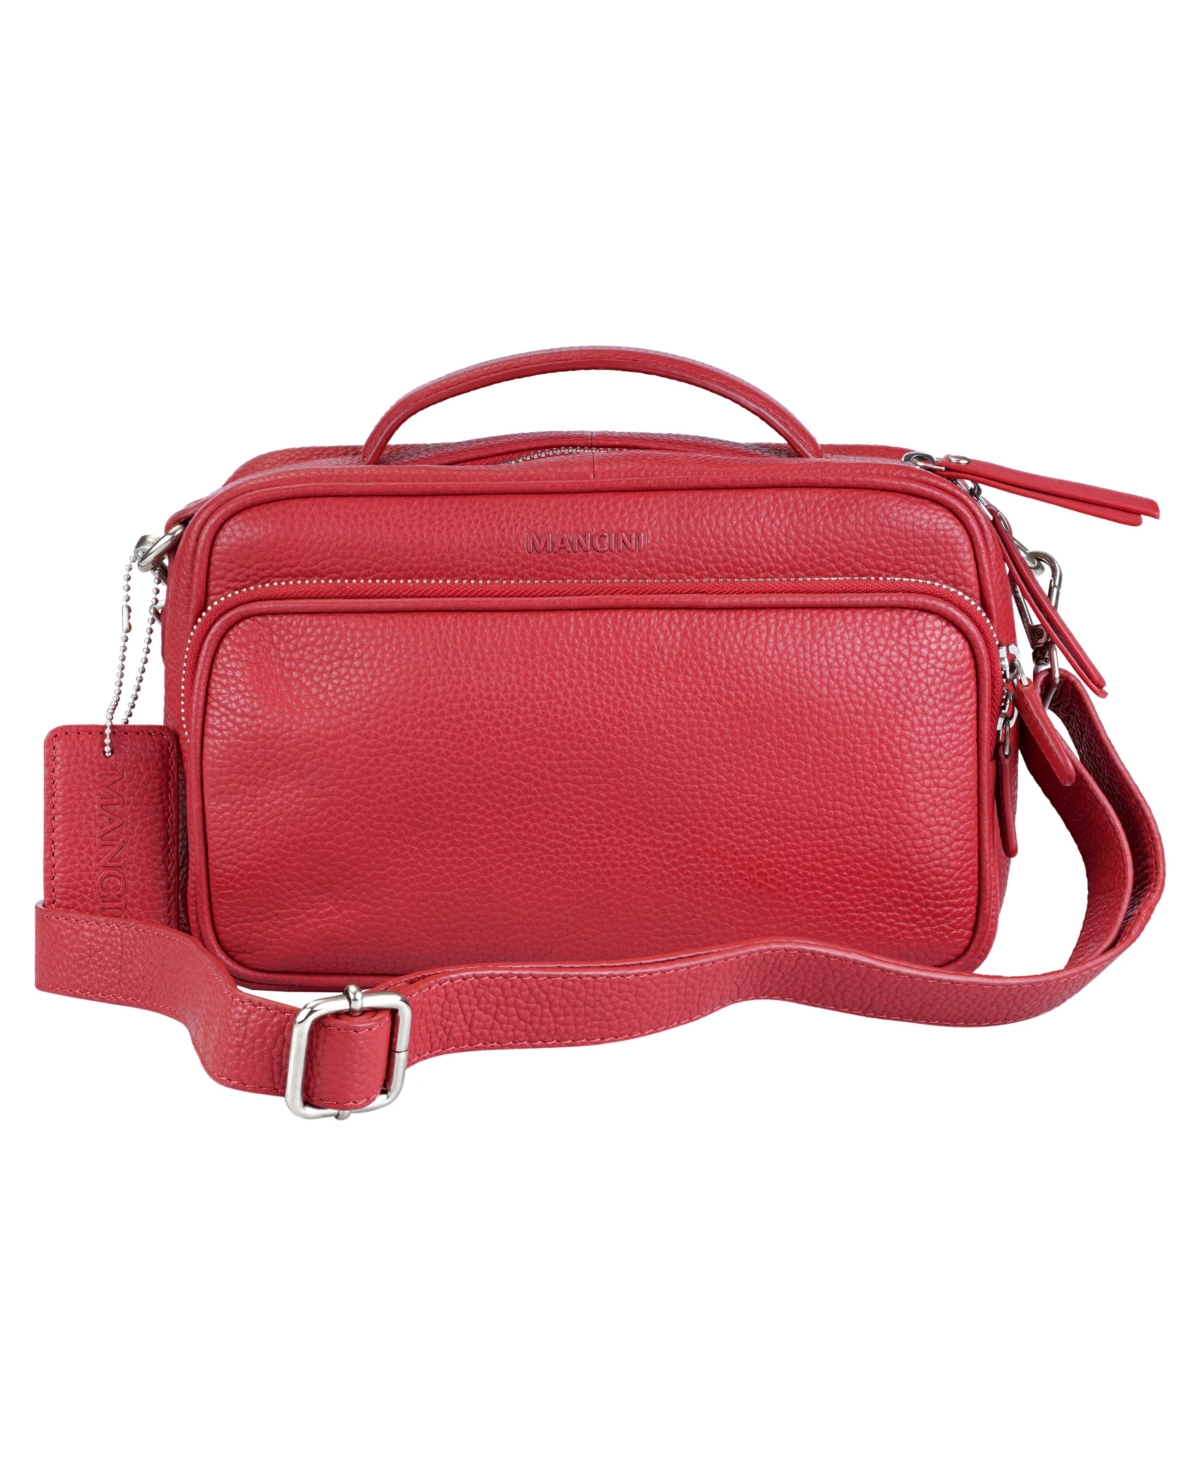 Mancini Pebbled Collection Julianna Leather Crossbody Satchel Bag In Red